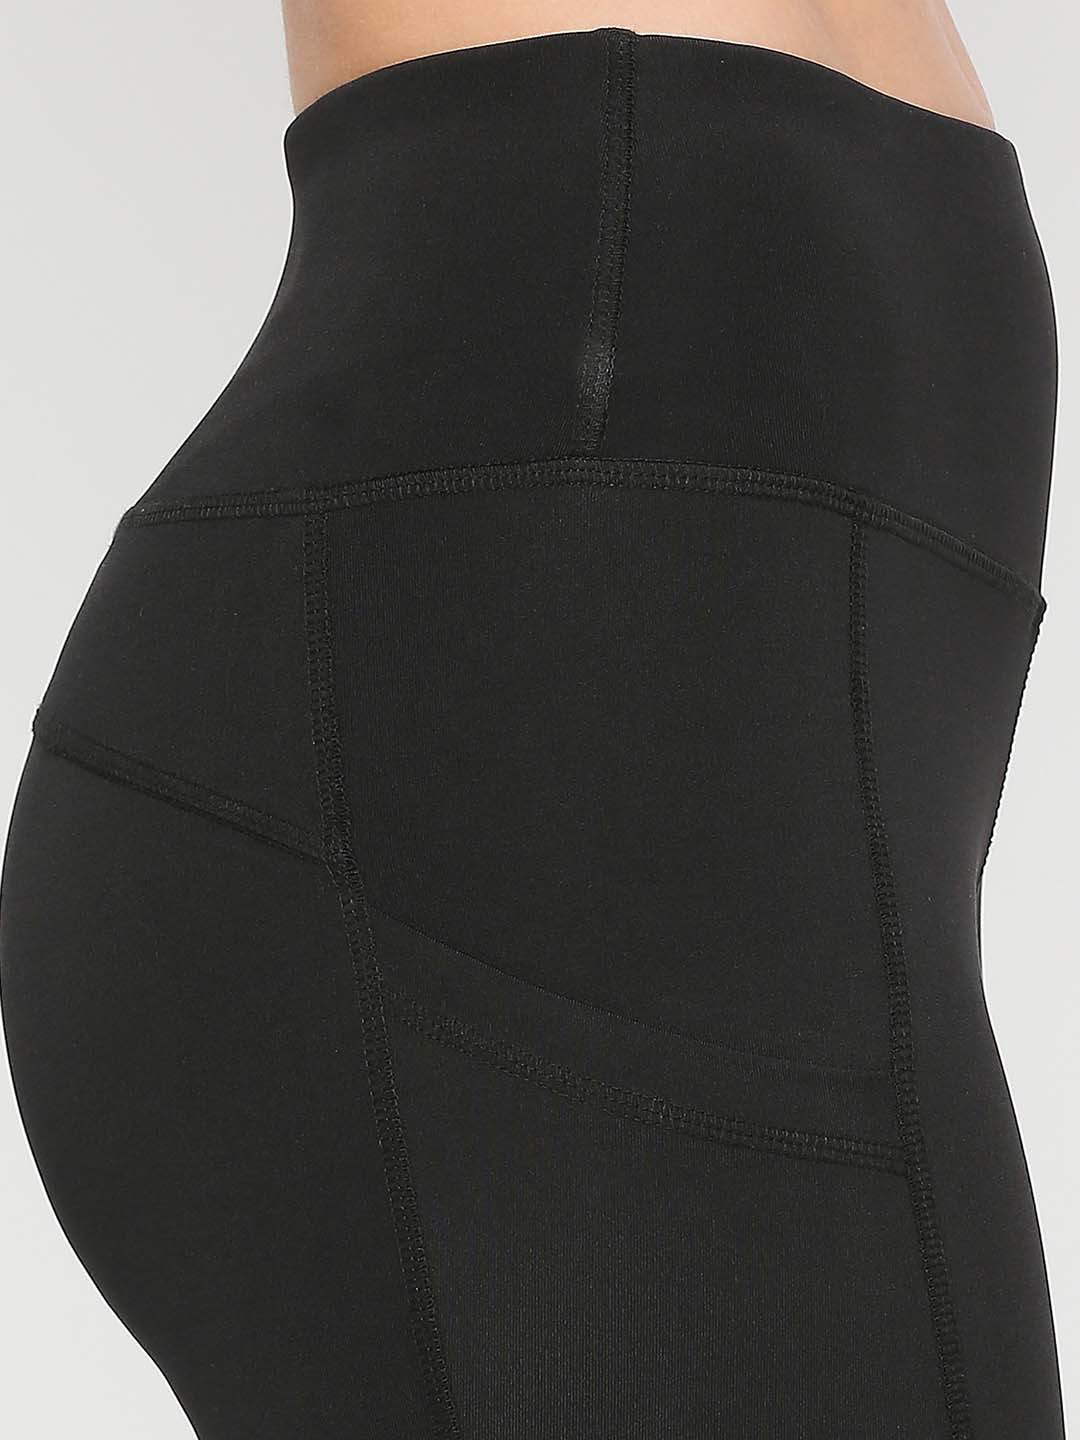 Women's Black Sports Leggings - Stay Comfortable and Stylish